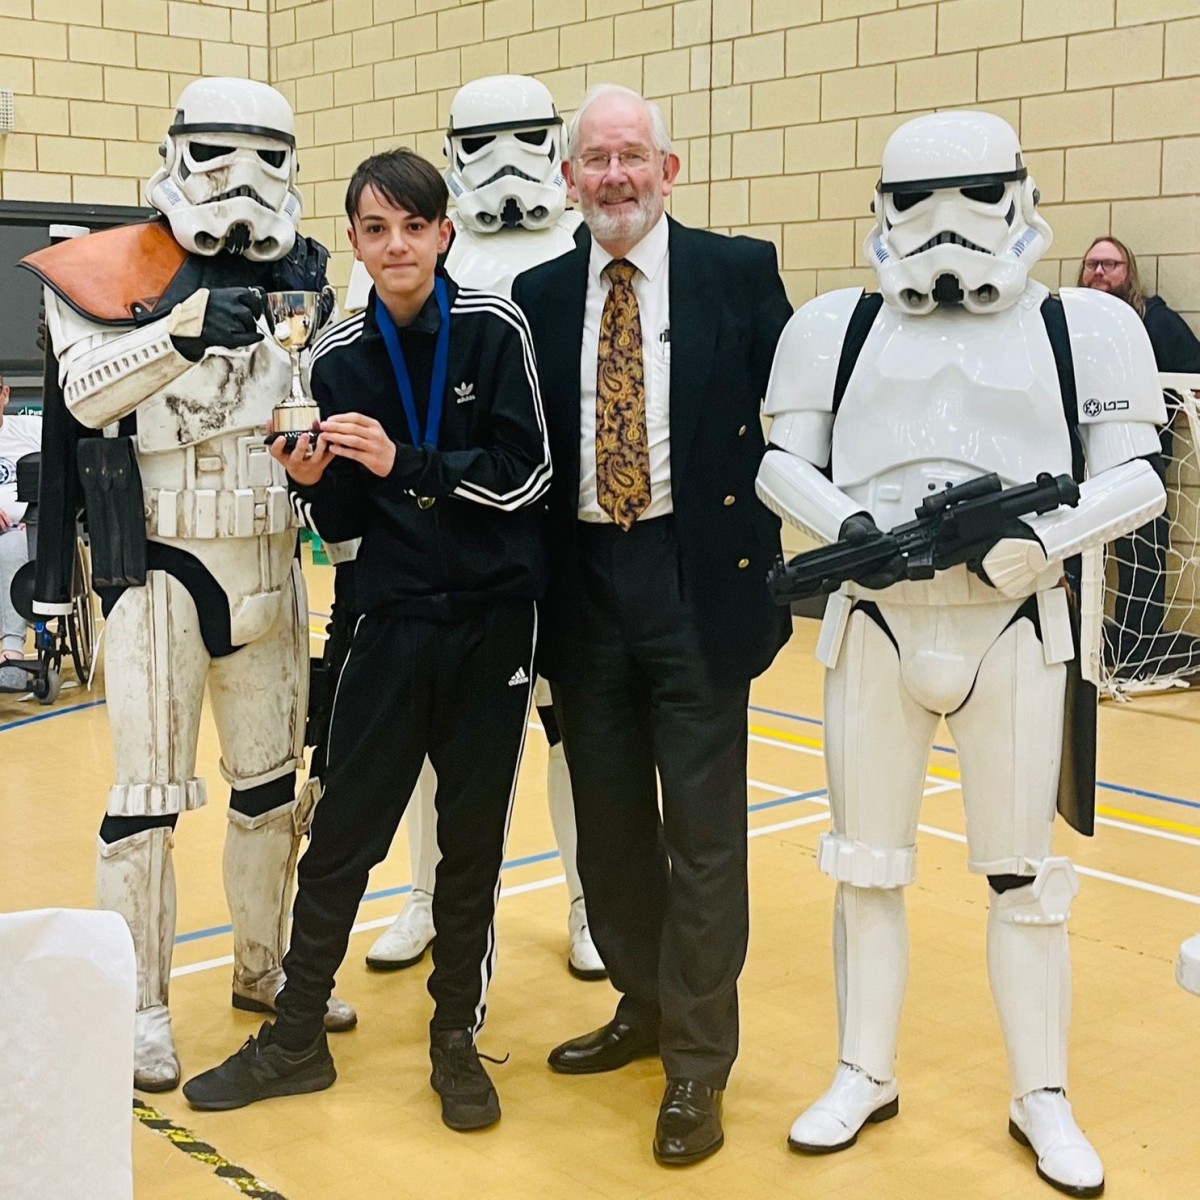 Evren with Keith Beer and Stormtroopers - National Championships 2022